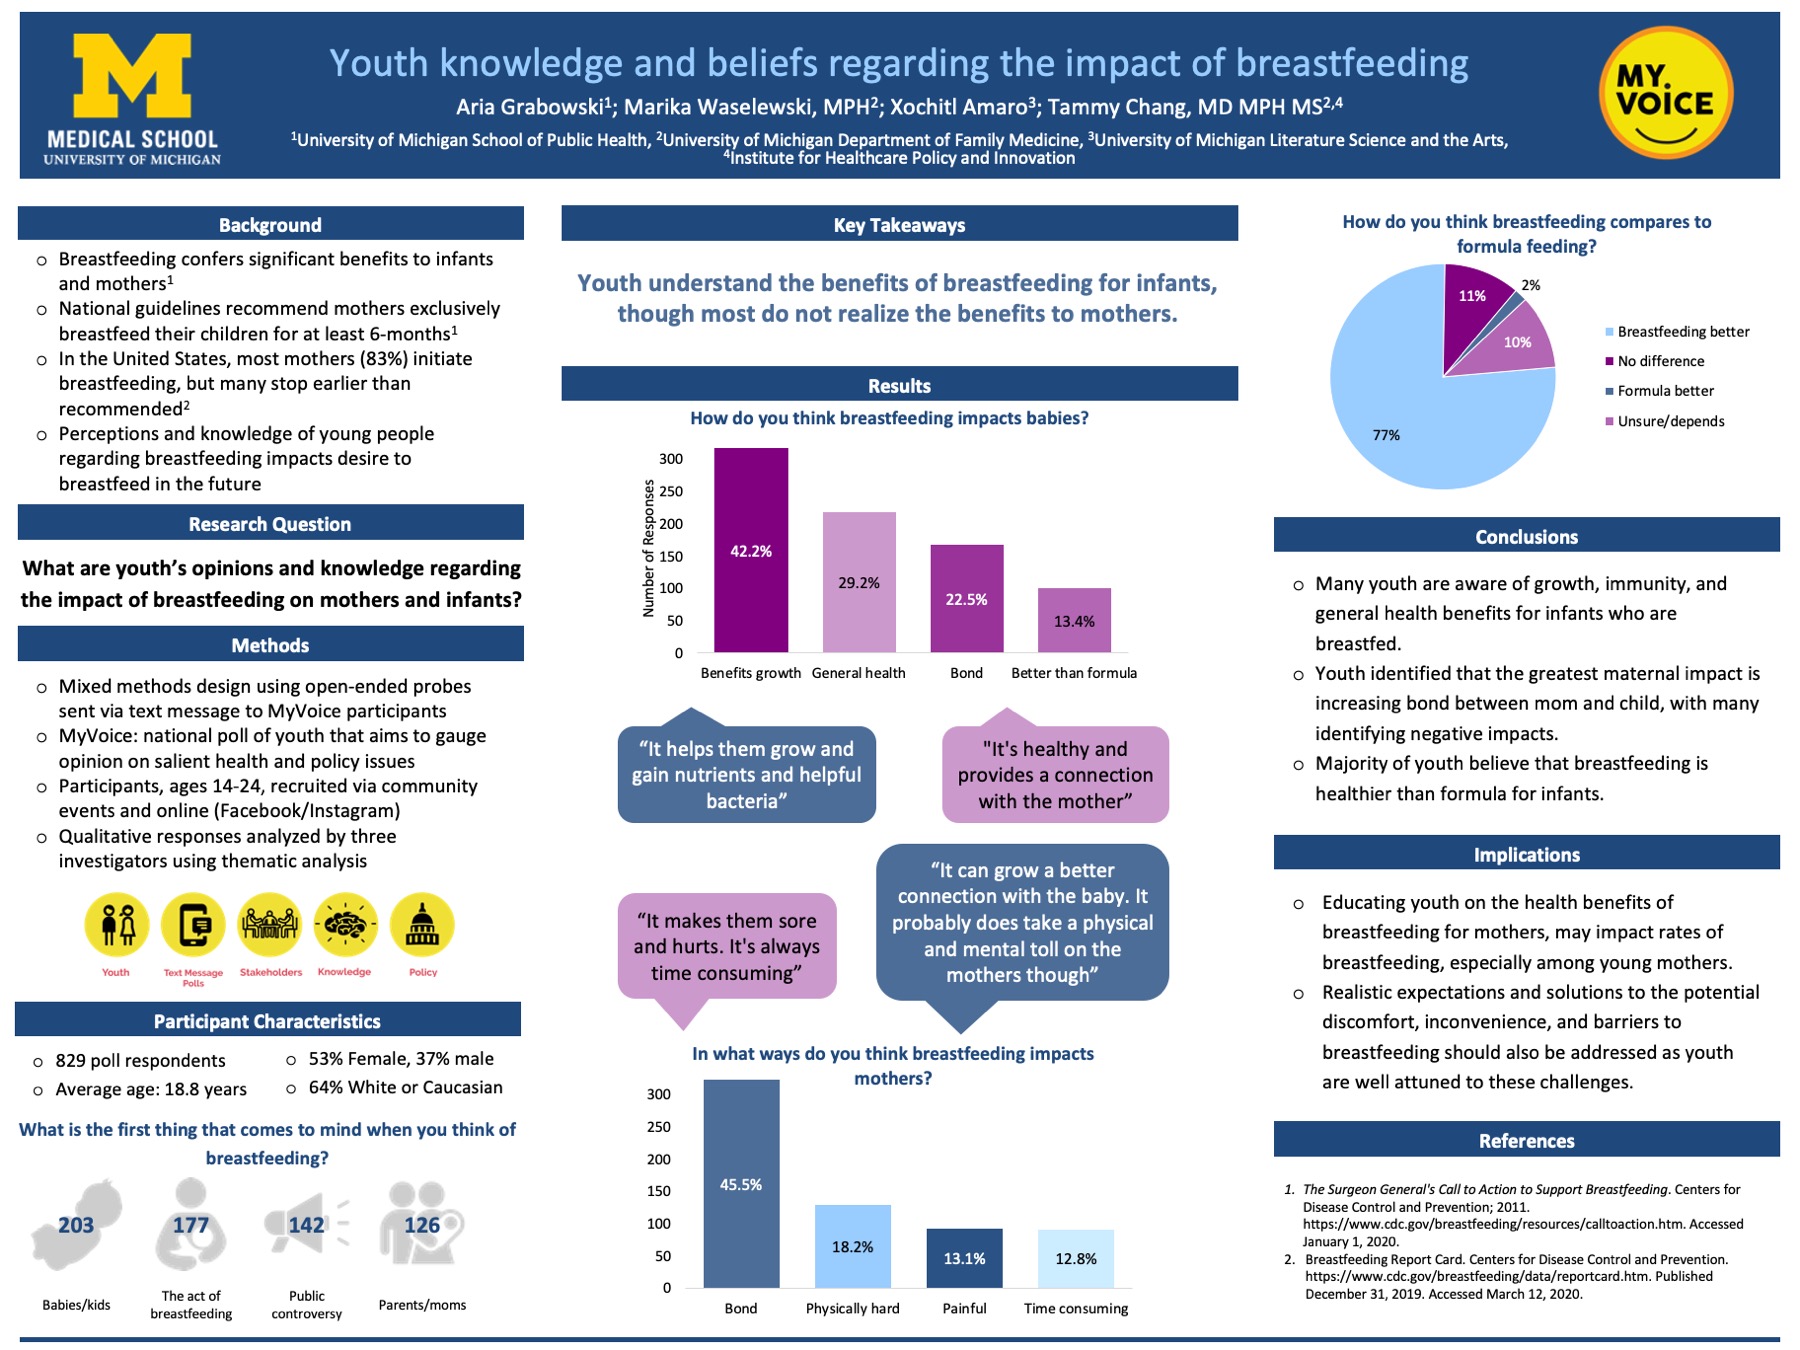 Youth Knowledge and Beliefs Regarding the Impact of Breastfeeding